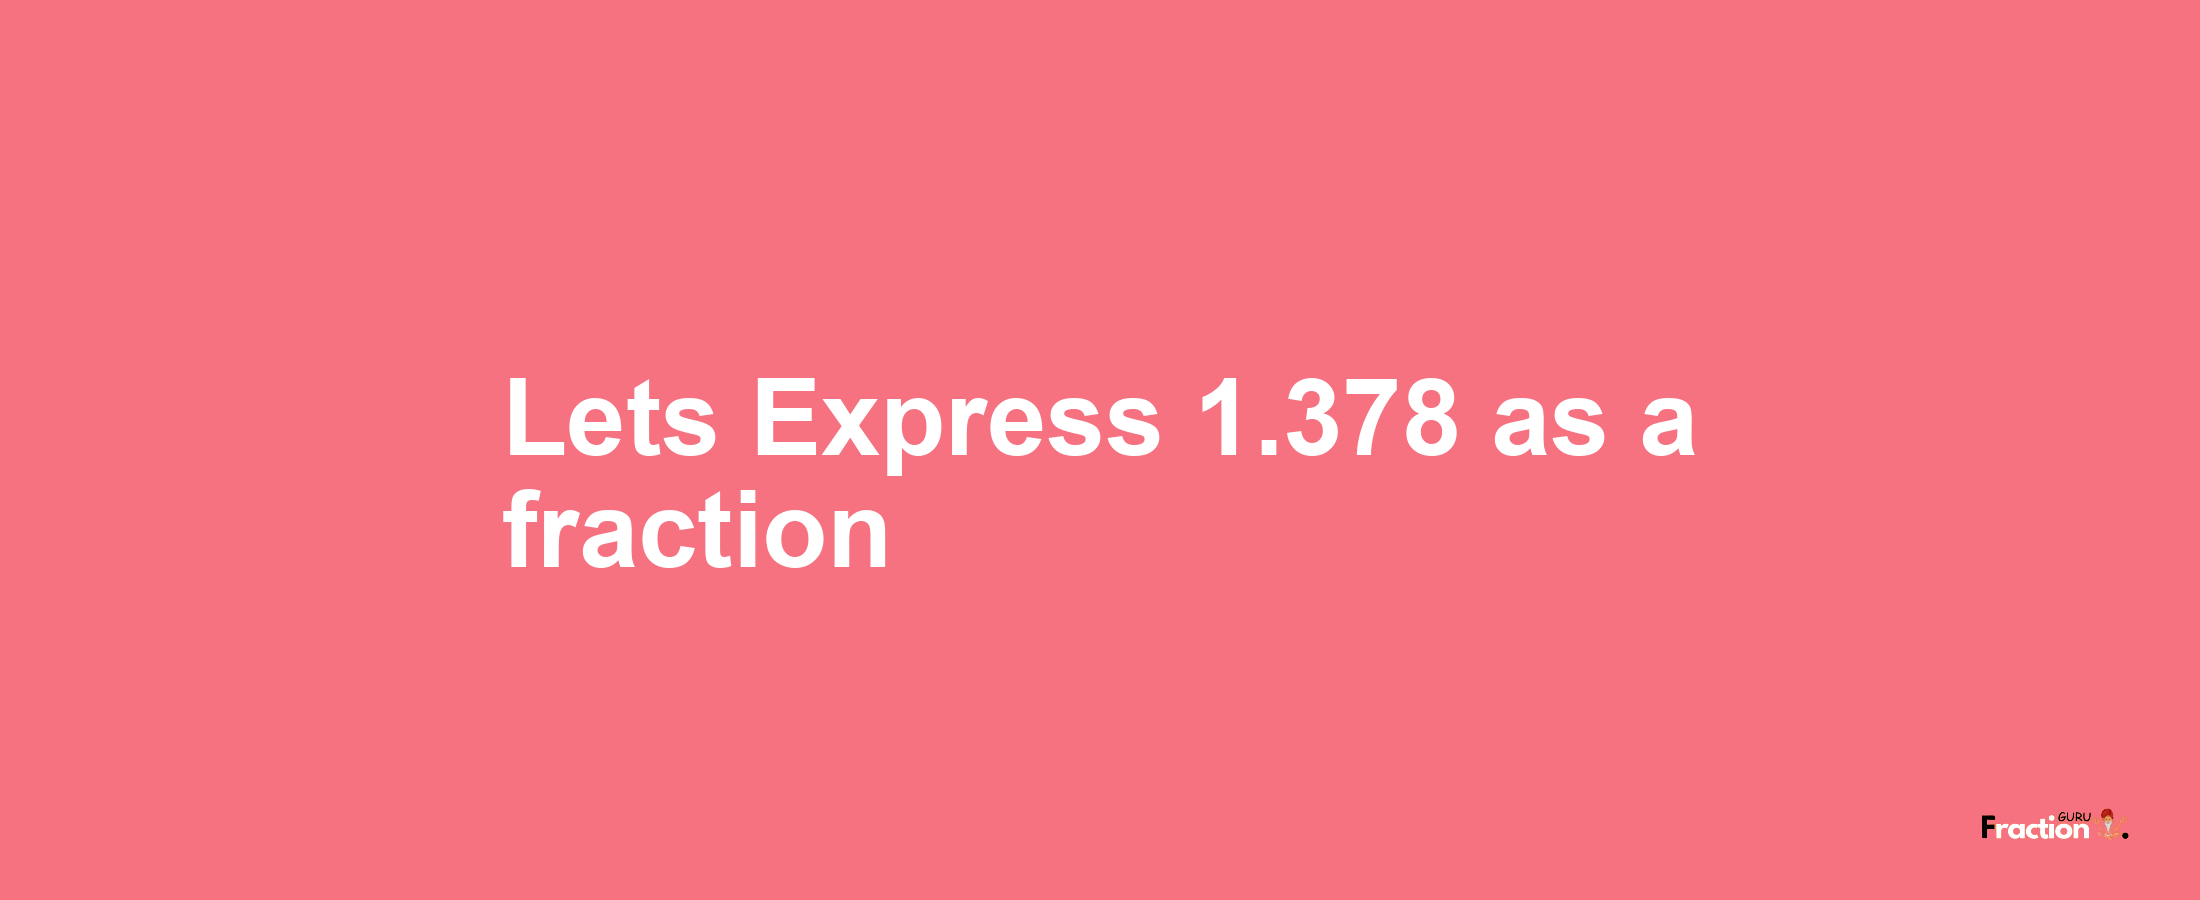 Lets Express 1.378 as afraction